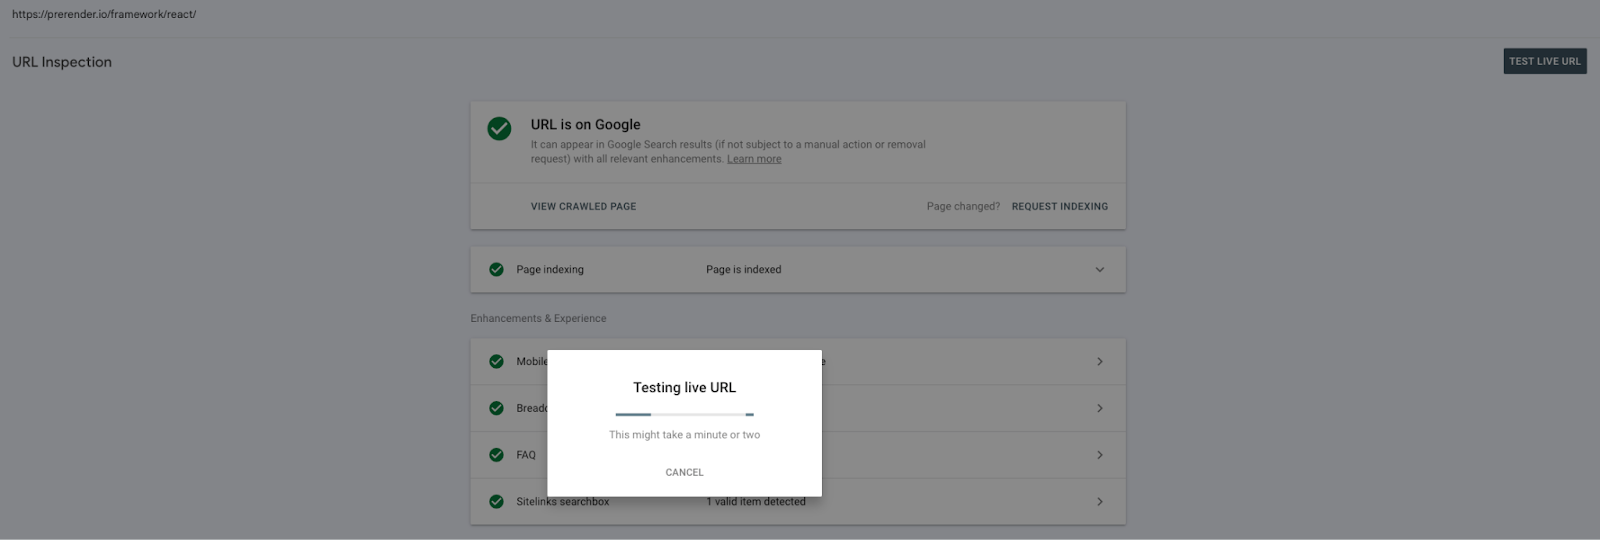 Page indexing results in Google Search Console